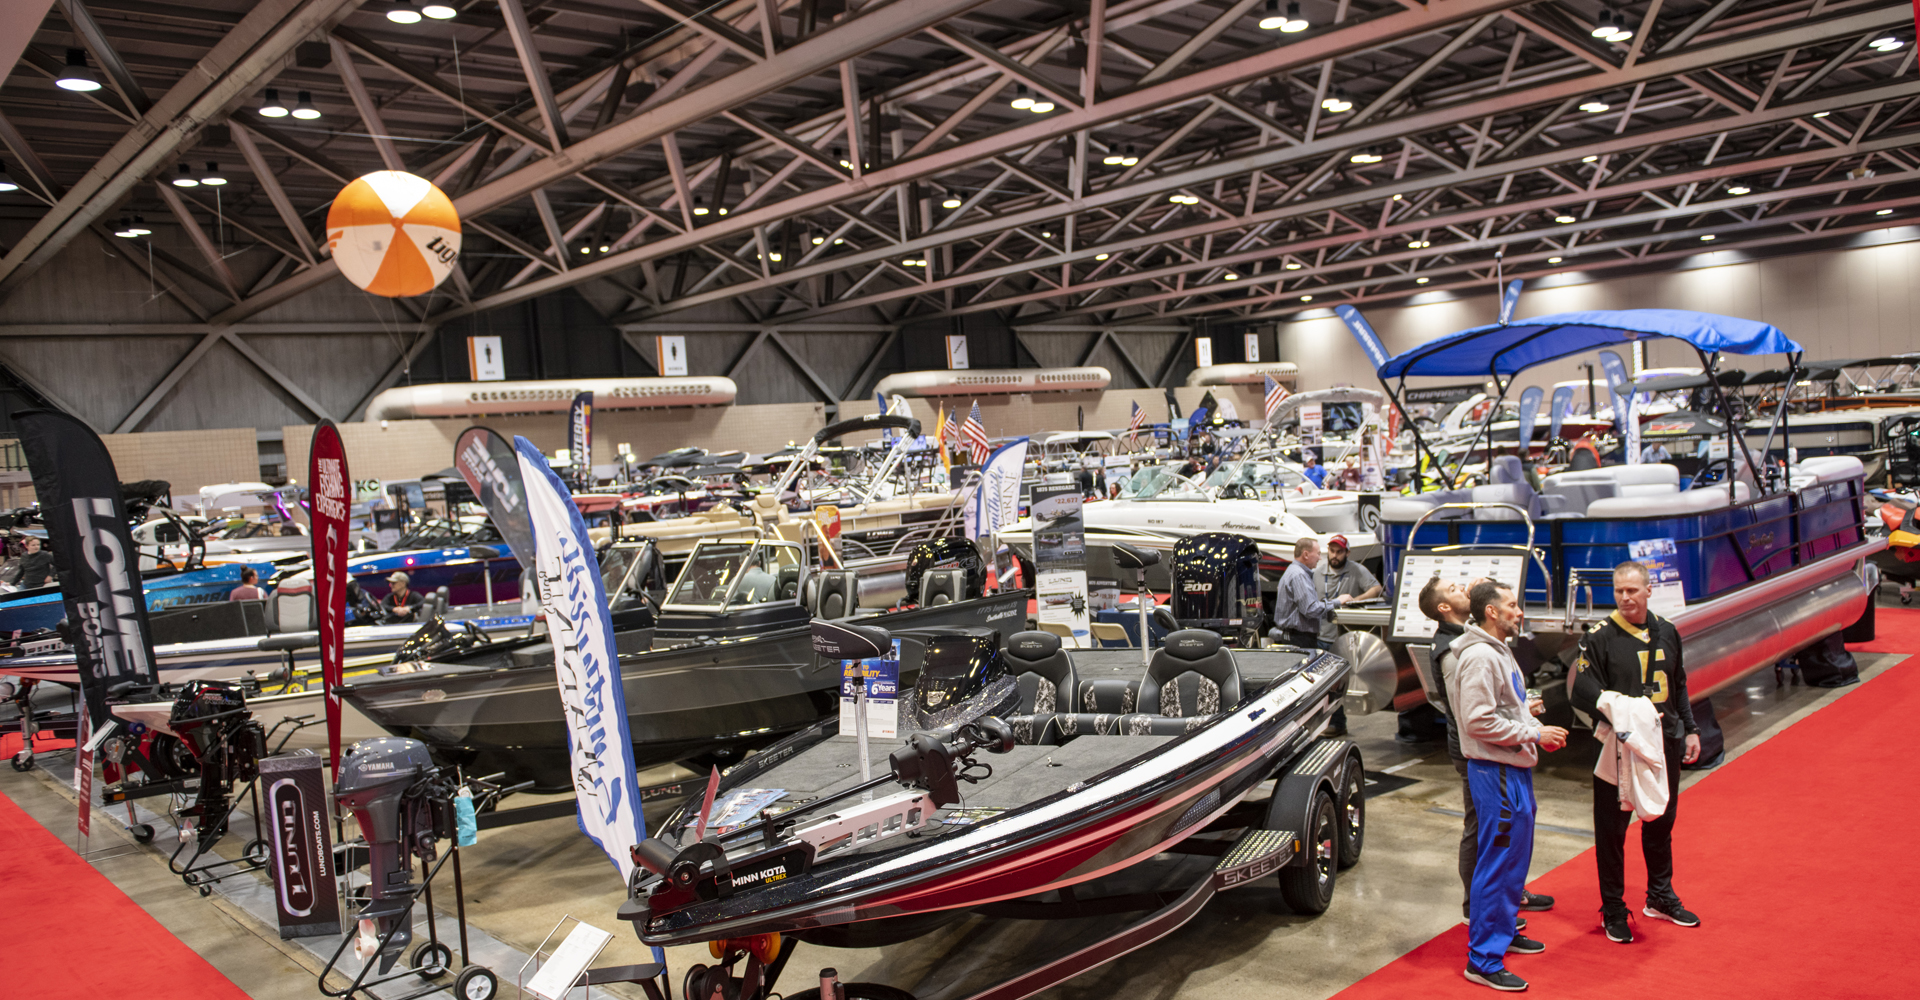 Find a Boat Show near you Discover Boating